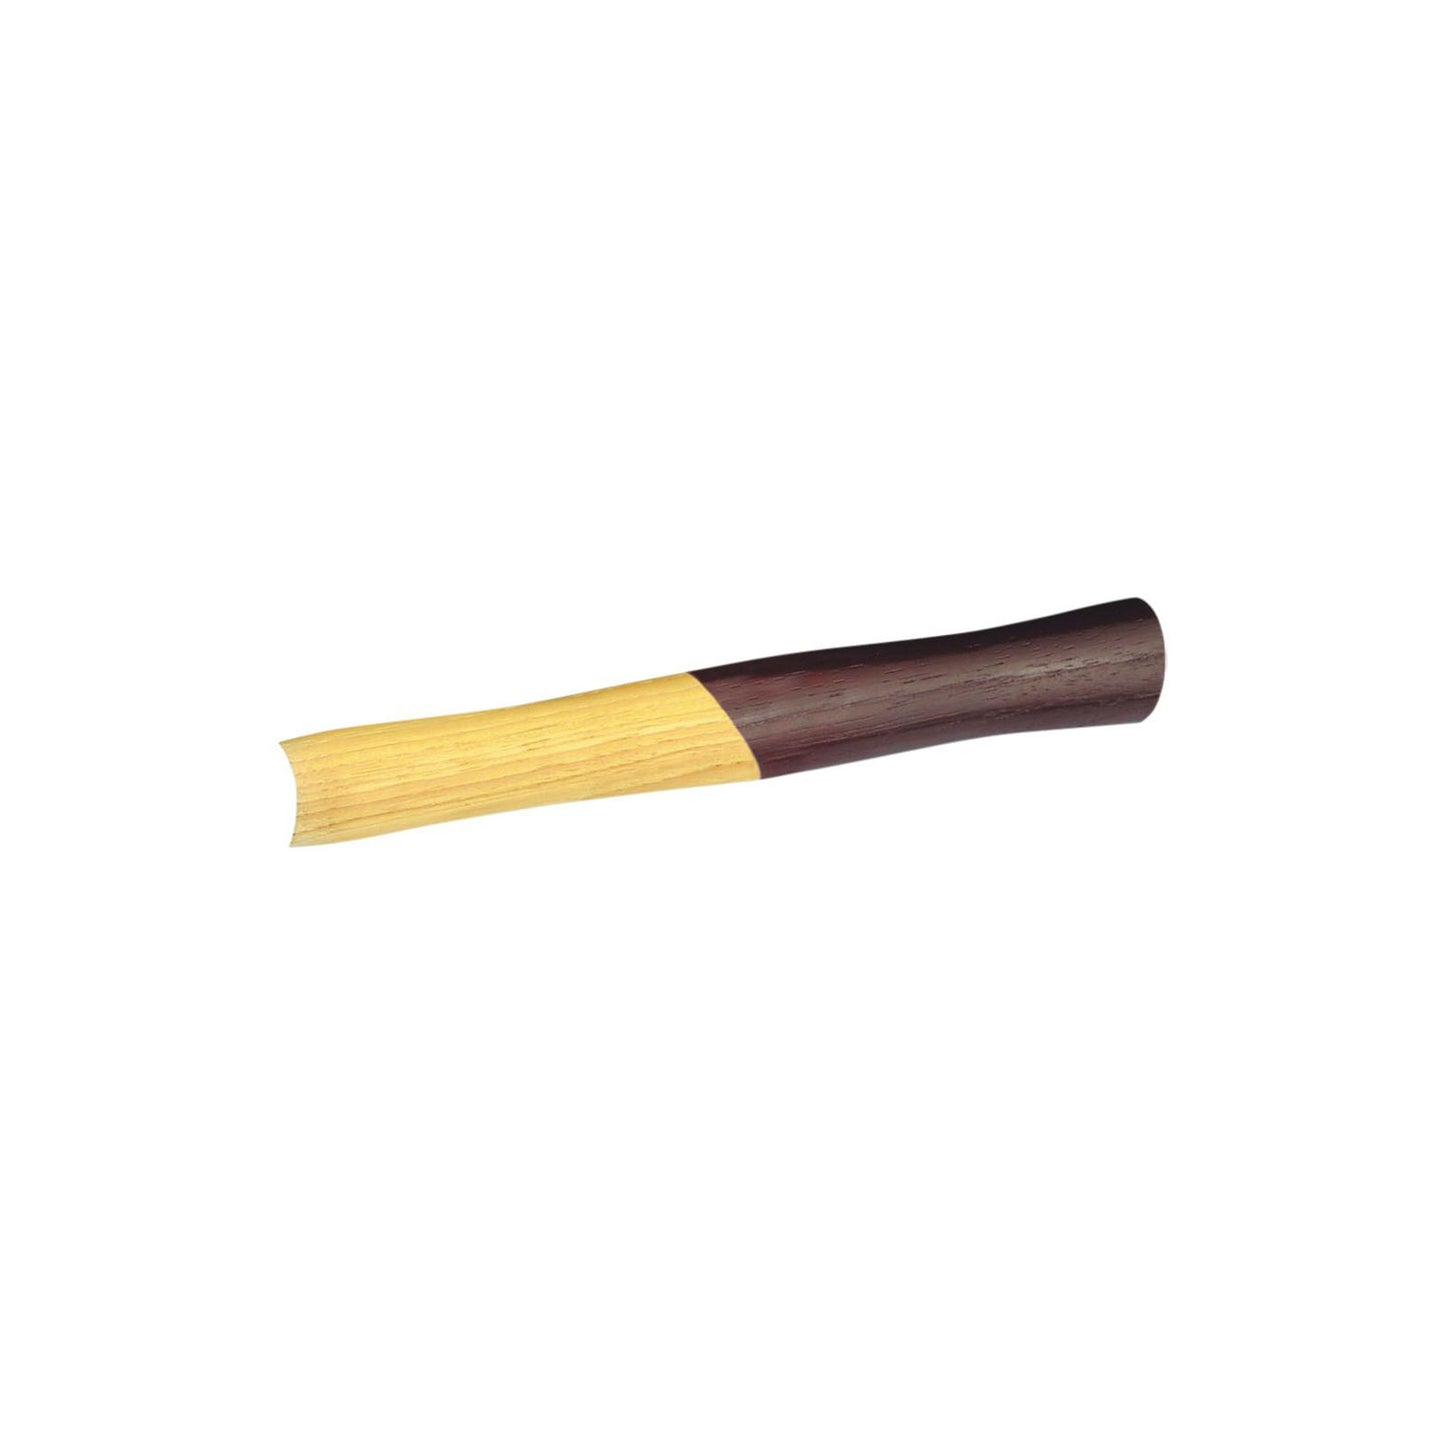 GEDORE E 248 H-100 - Walnut replacement handle 90cm (8740270)